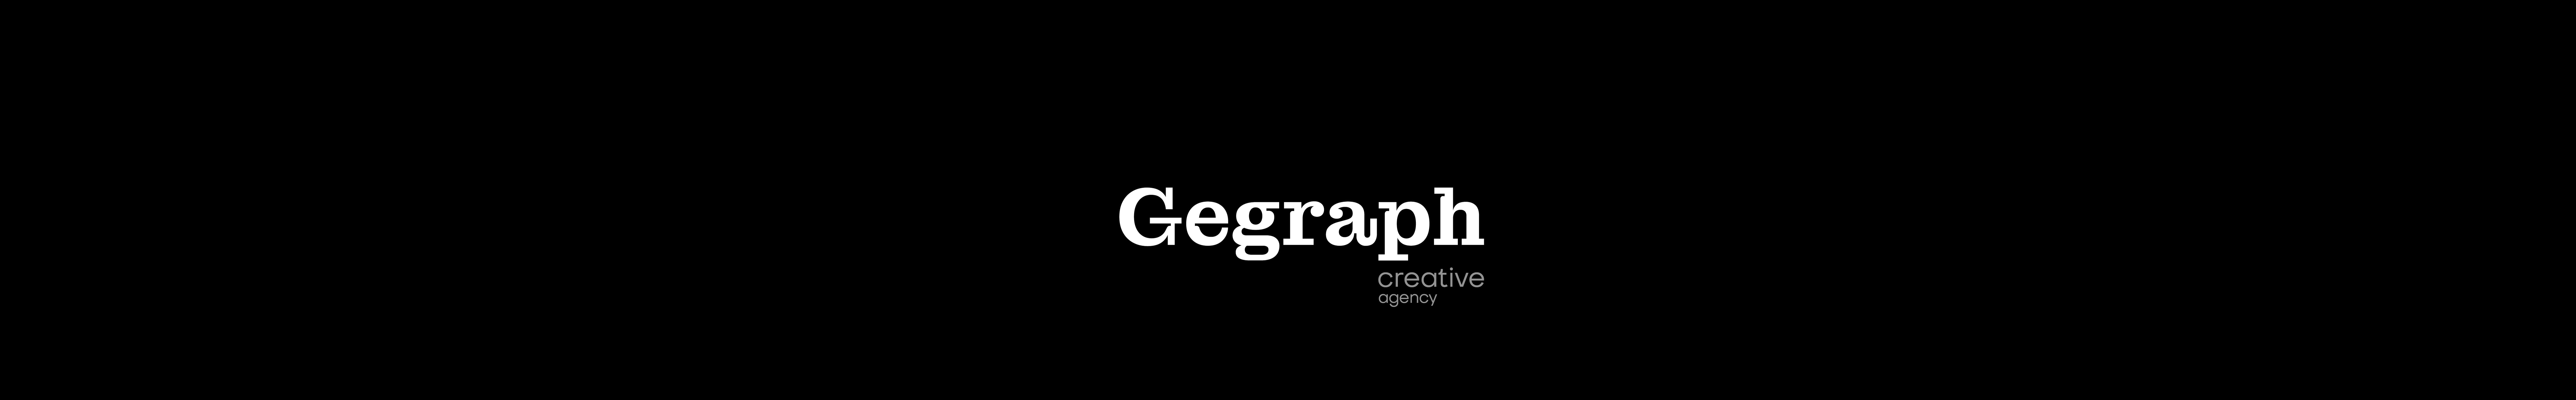 GEGRAPH agency's profile banner